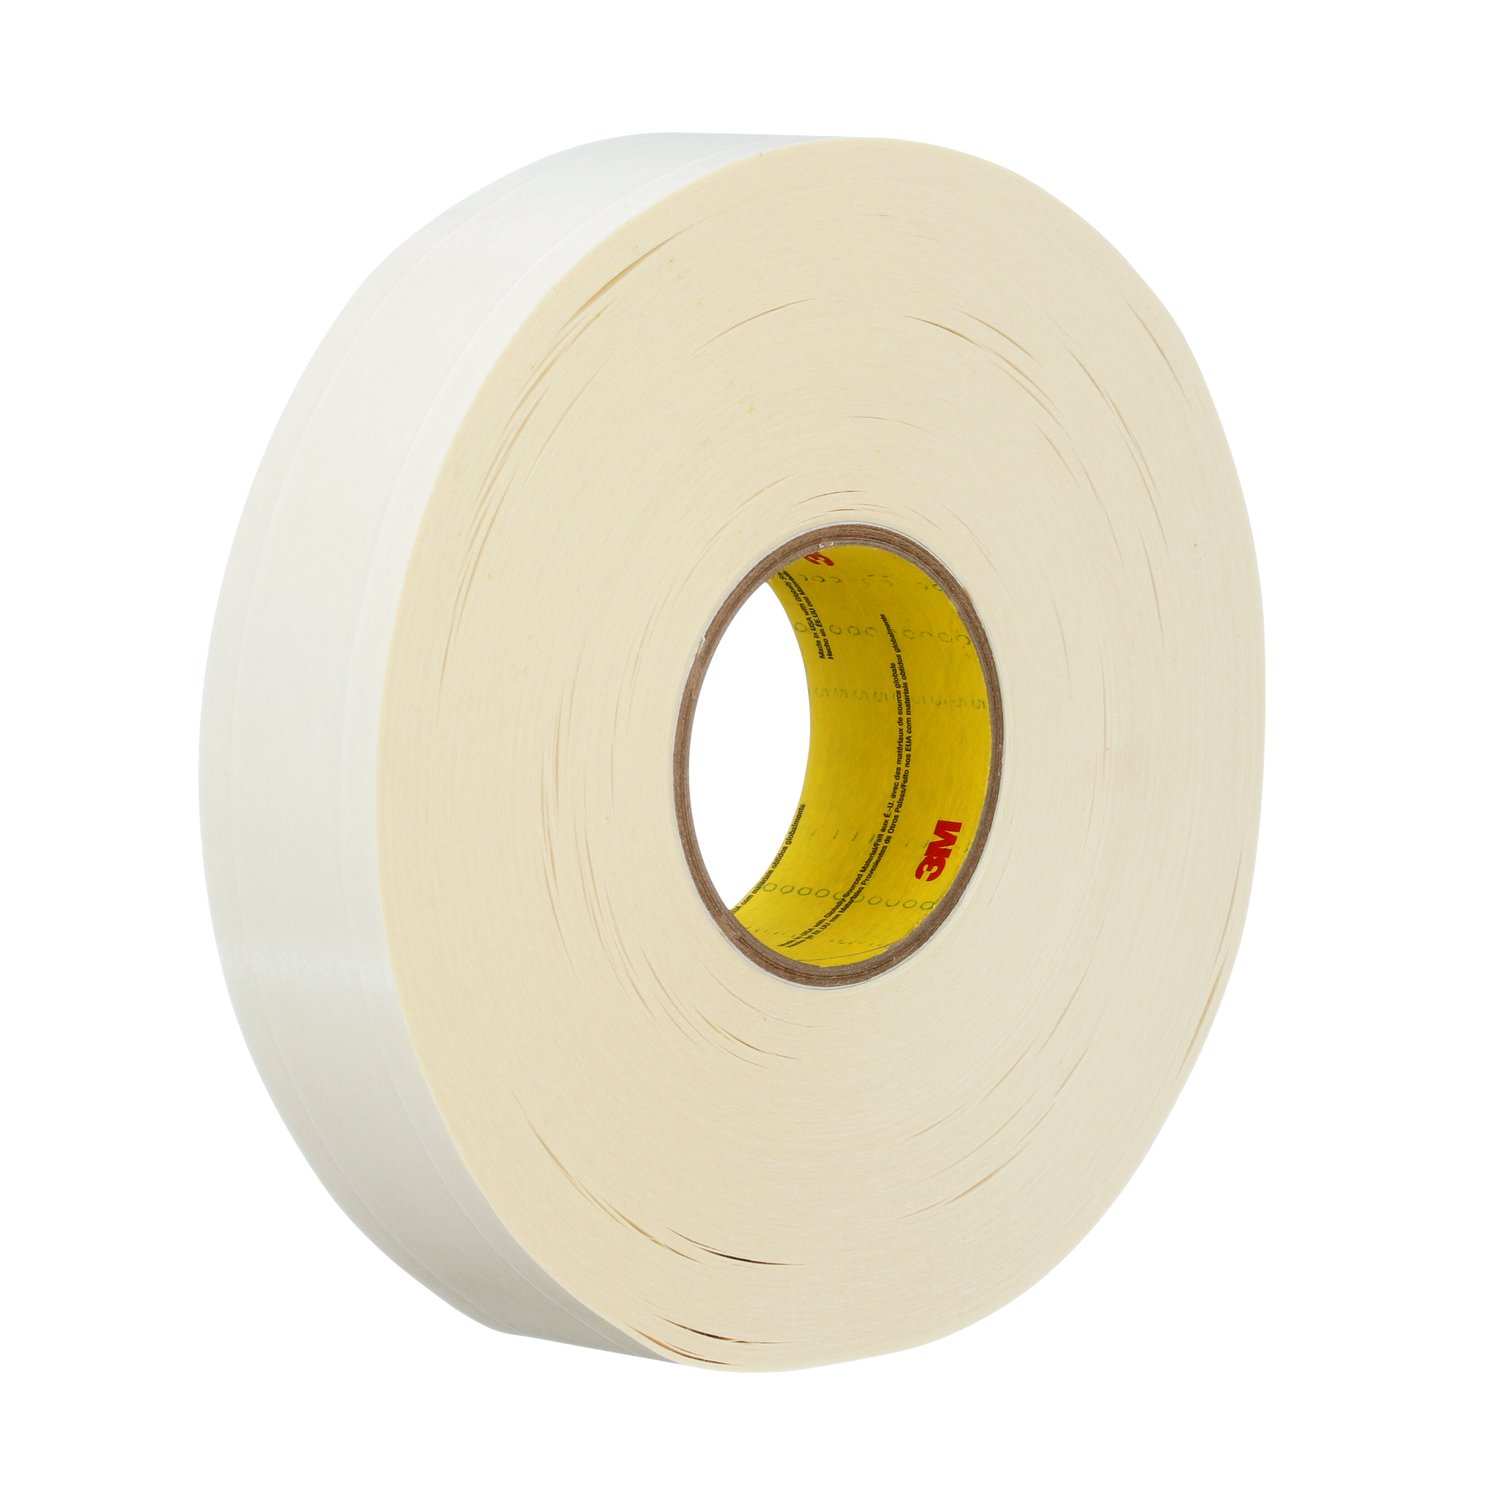 7100028168 - 3M Repulpable Heavy Duty Double Coated Tape R3287, White, 36 mm x 165
m, 5 mil, 6 rolls per case